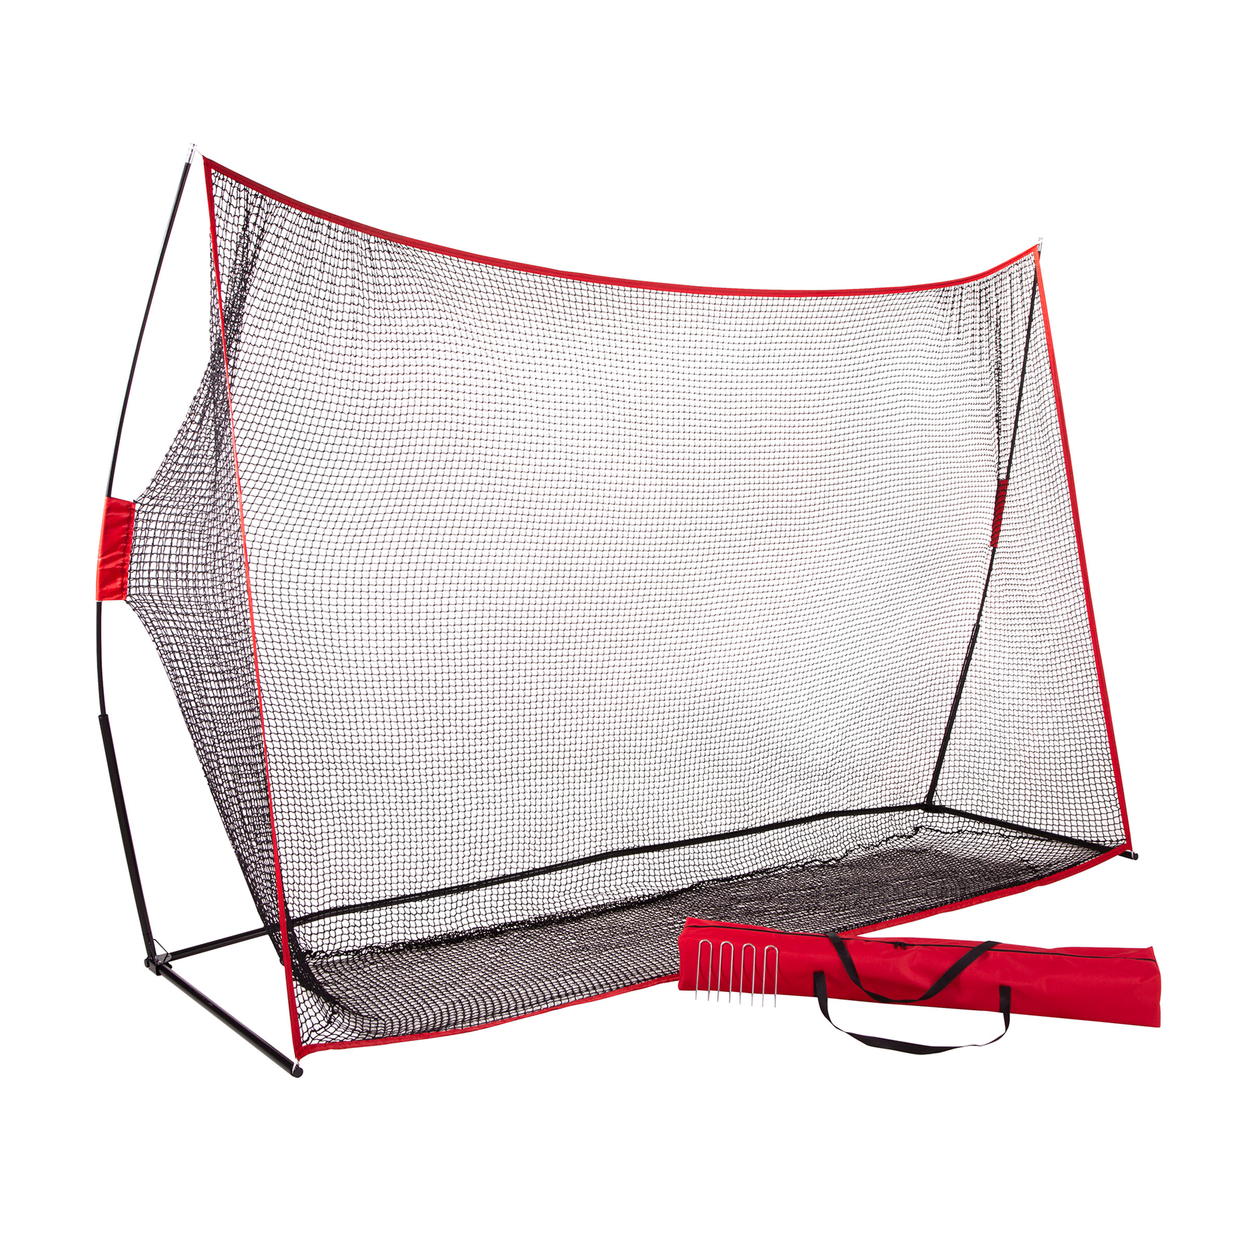 Golf Net 10 X 7 Heavy Duty Golf Training Equipment Net With Steel Frame And Carry Bag